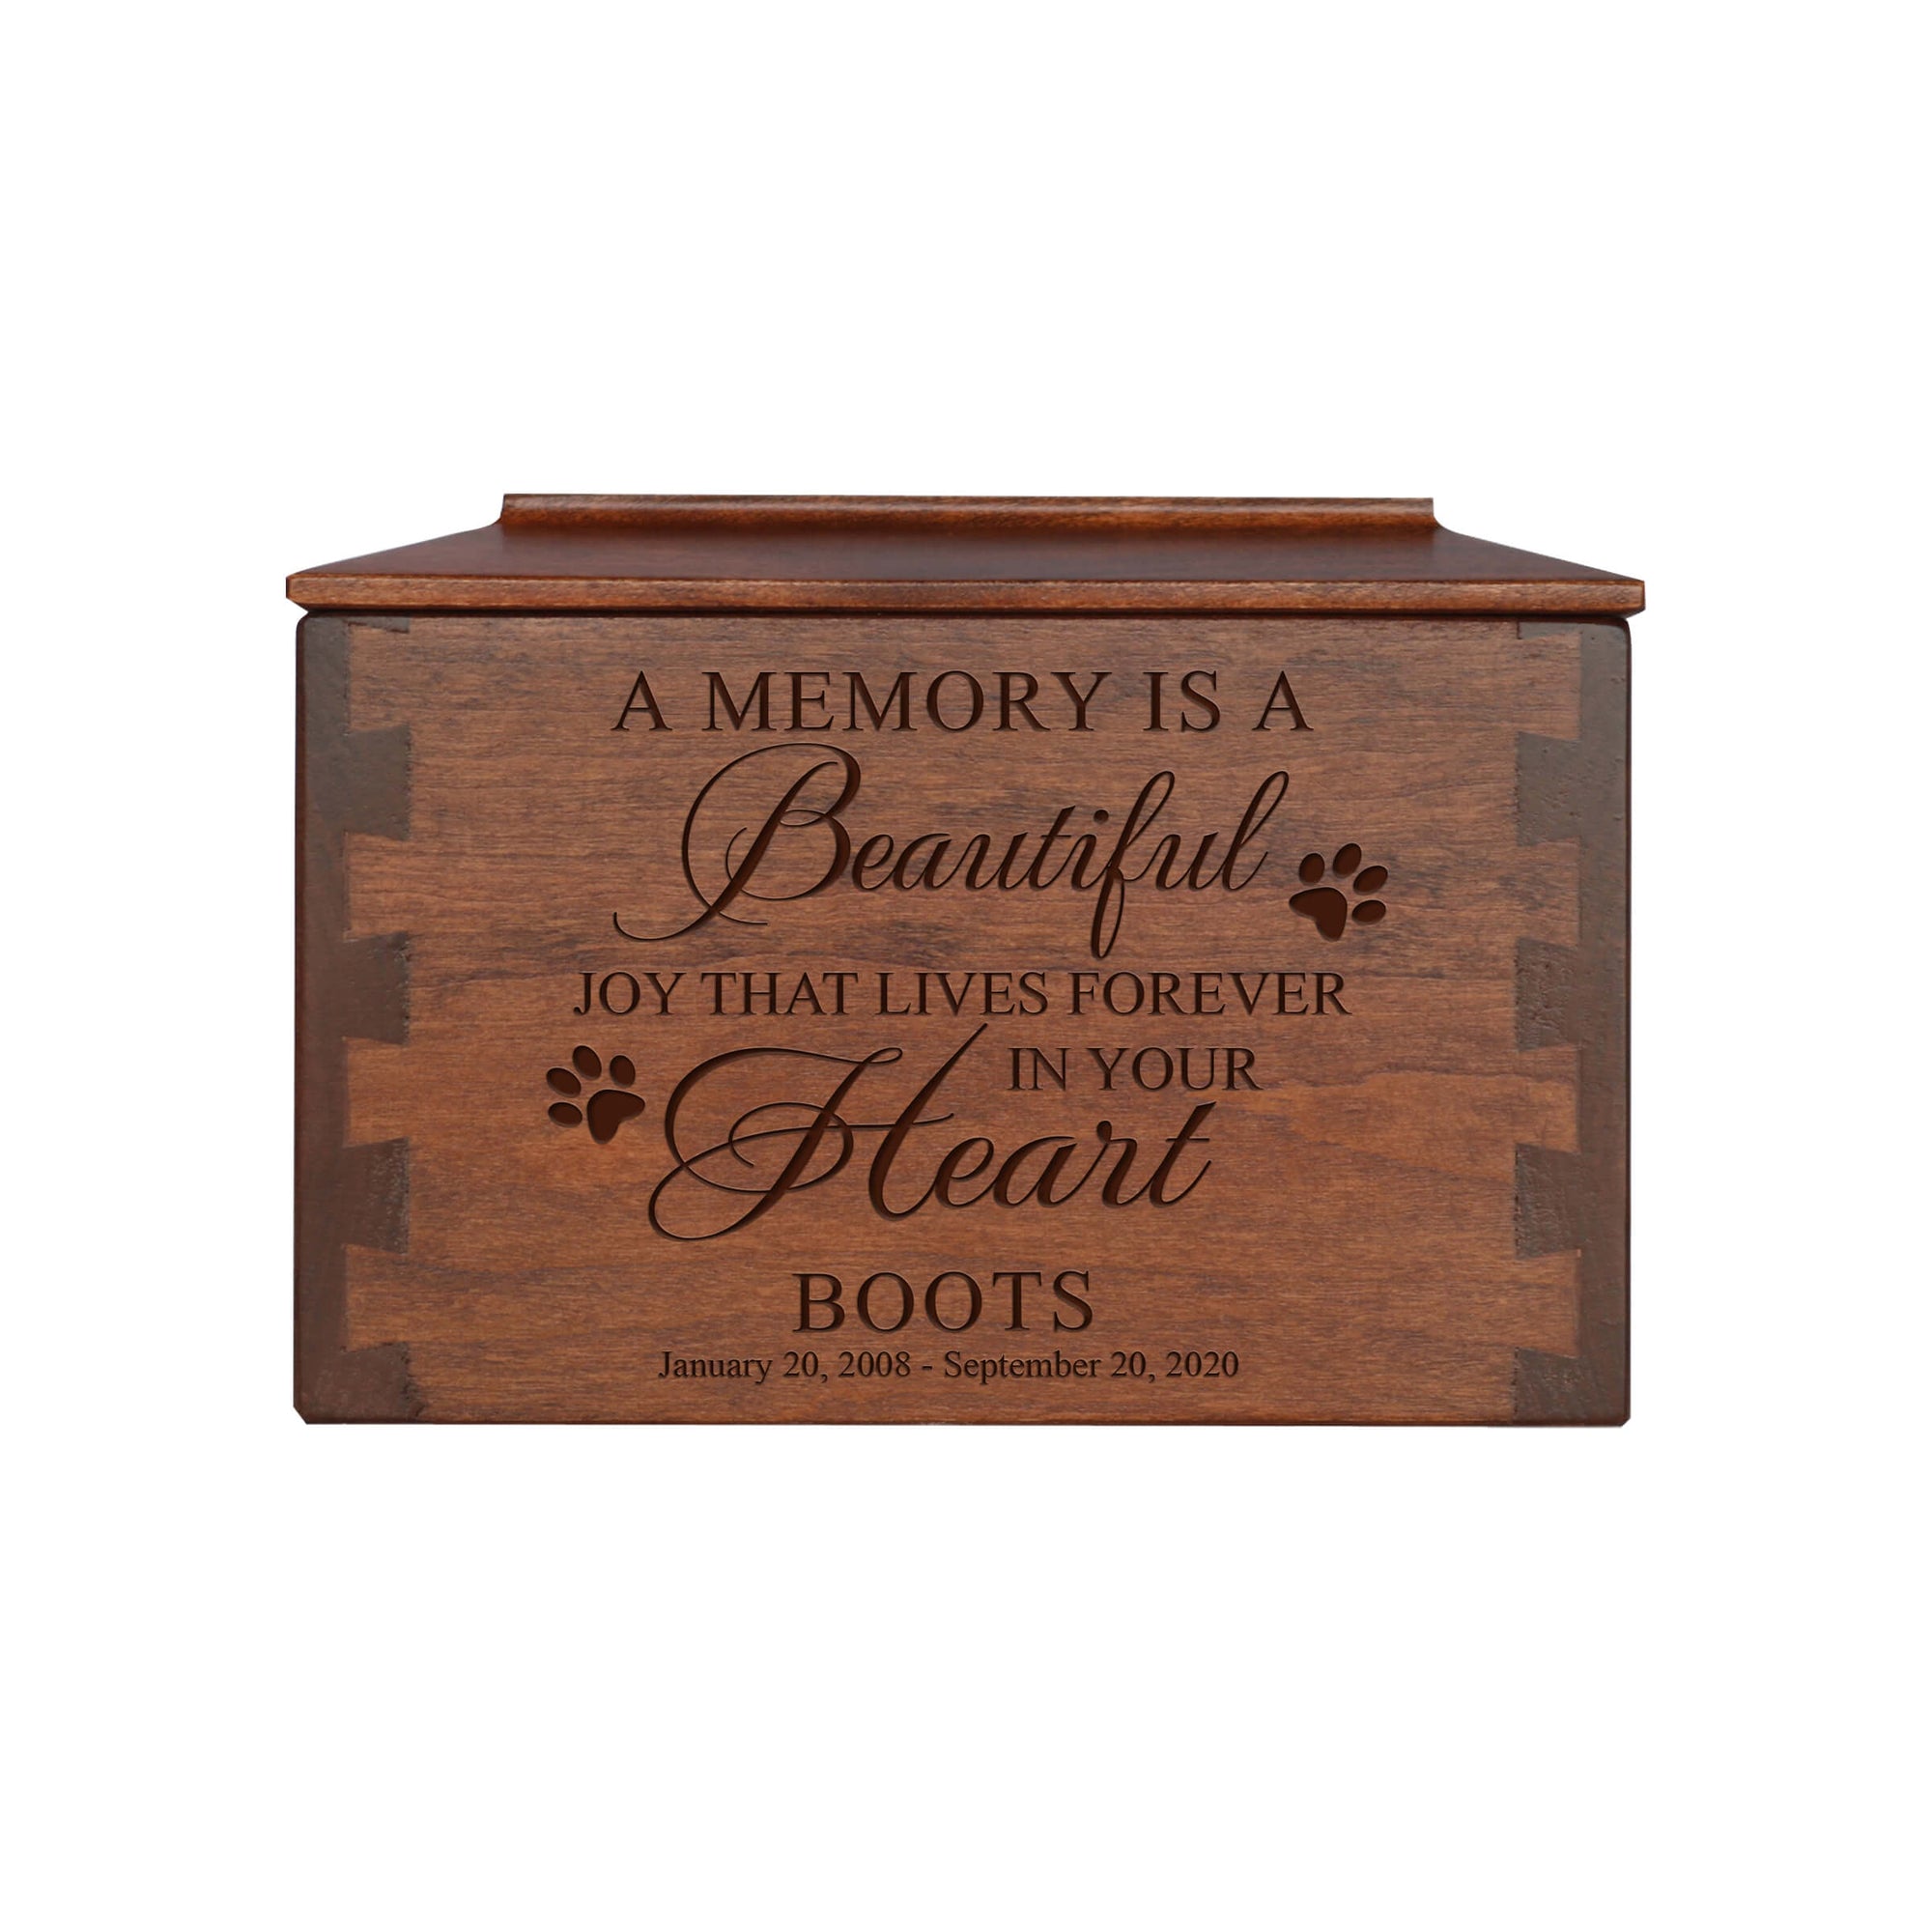 Pet Memorial Dovetail Cremation Urn Box for Dog or Cat - A Memory Is A Beautiful Joy